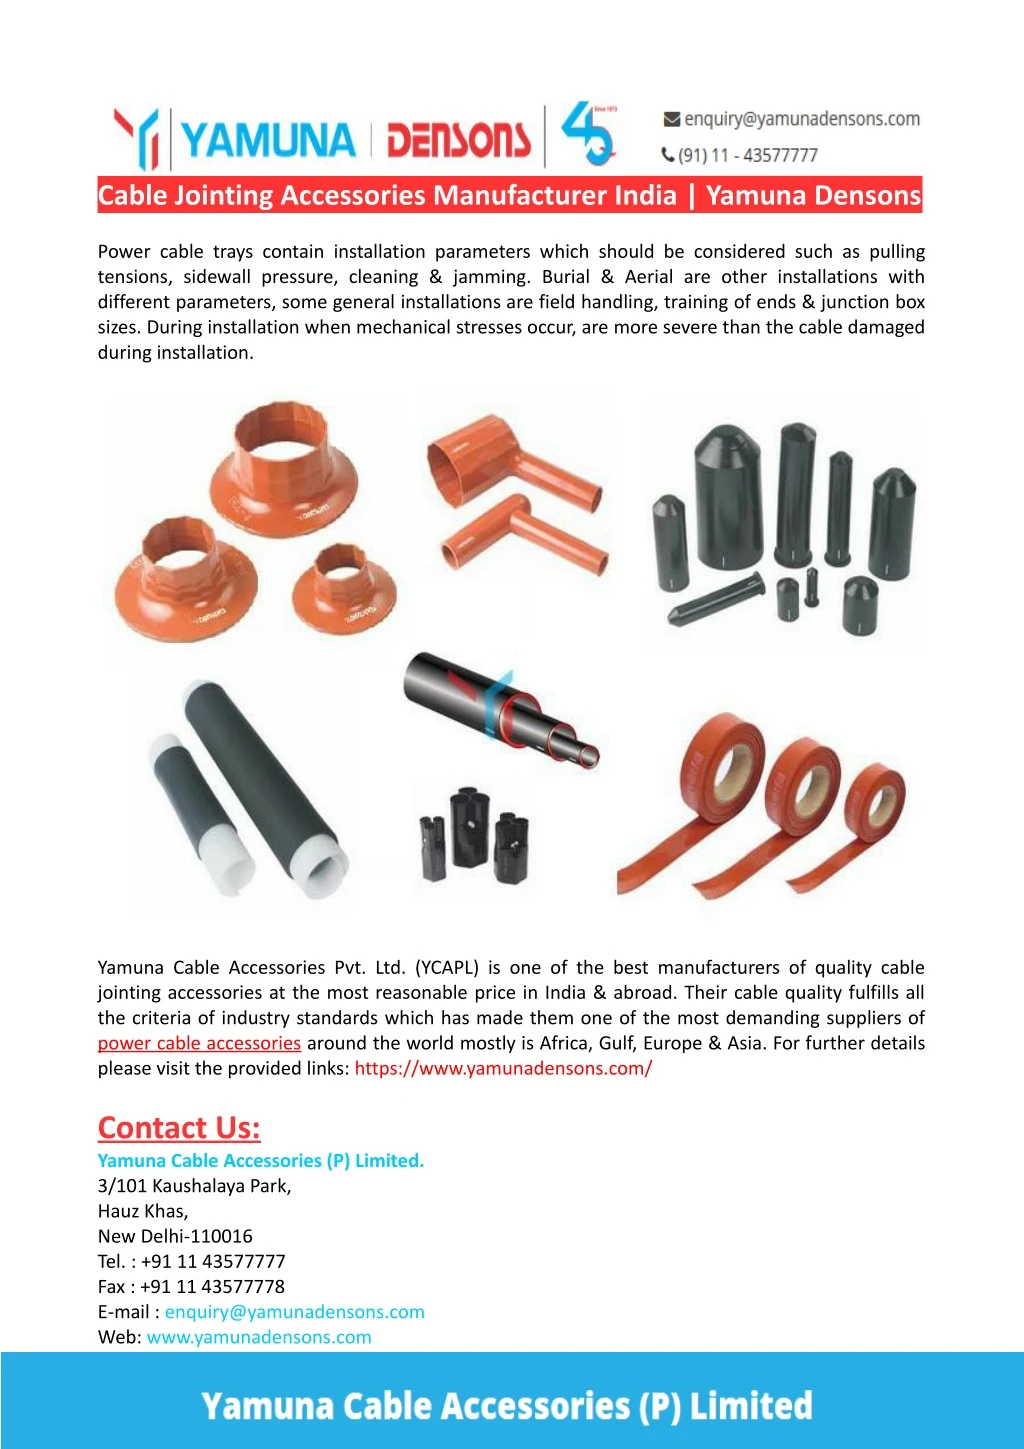 cable jointing accessories manufacturer india